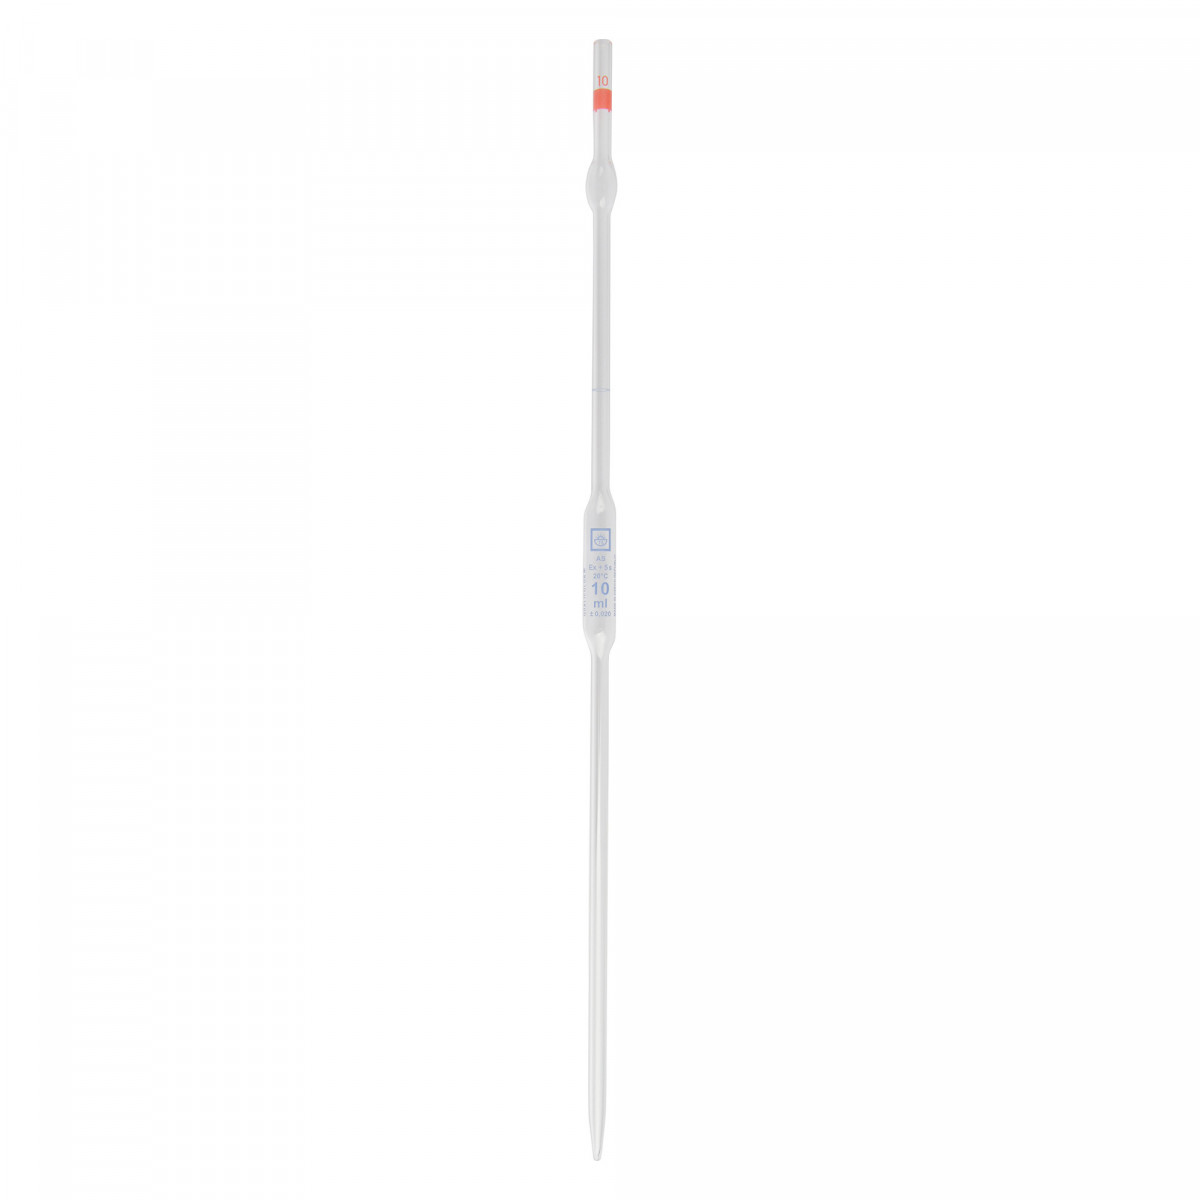 One-mark volumetric pipette with safety bulb, 10 ml